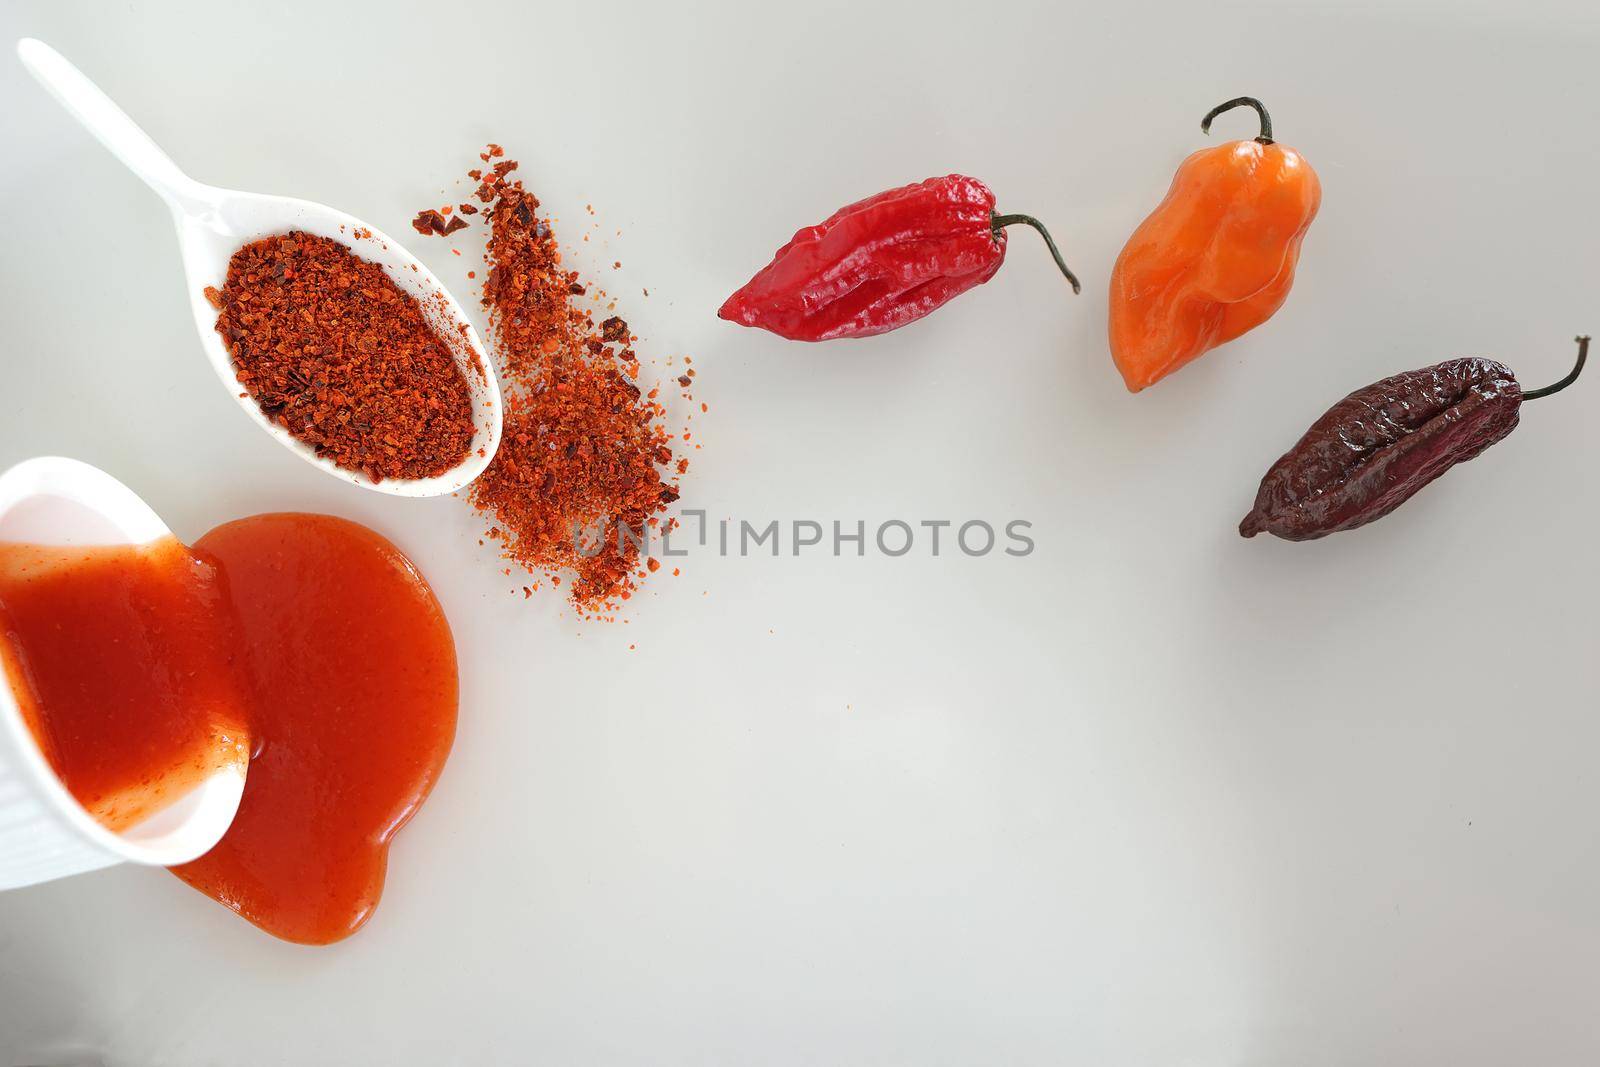 Three varieties of hot peppers and their derivatives - sauce and ground hot pepper on a white glass surface by Proxima13